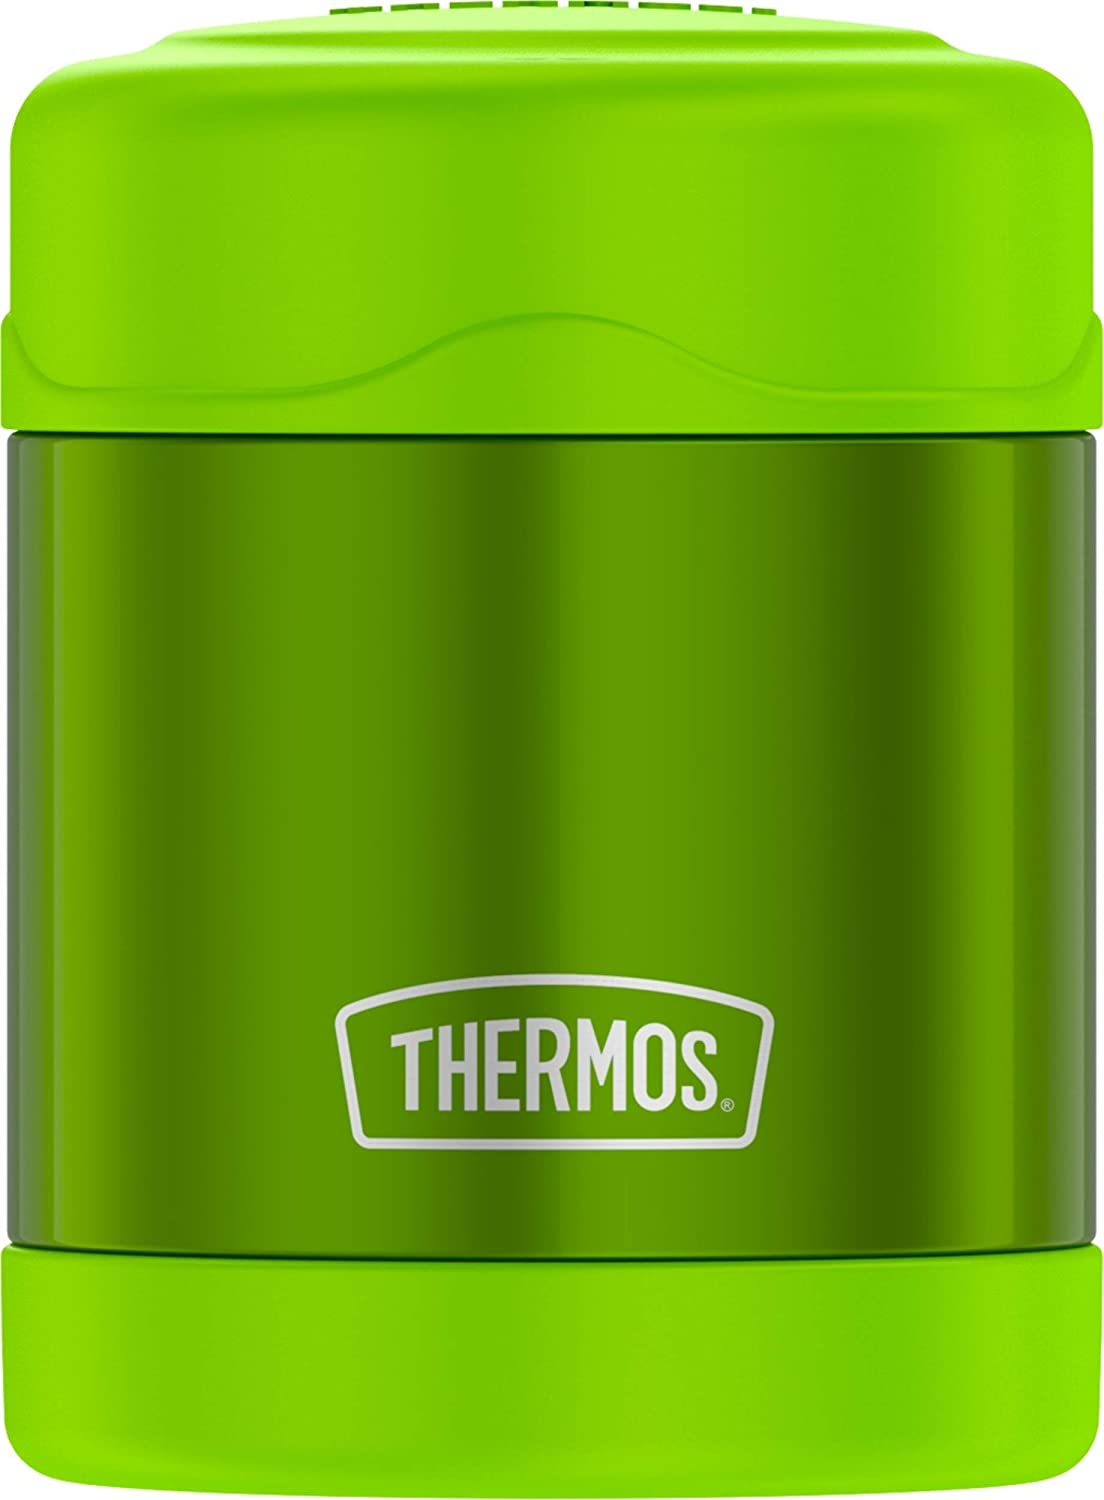 Thermos FUNtainer, Contenant Alimentaire Vert lime - 290ml    - Thermos - Boîte à repas - 